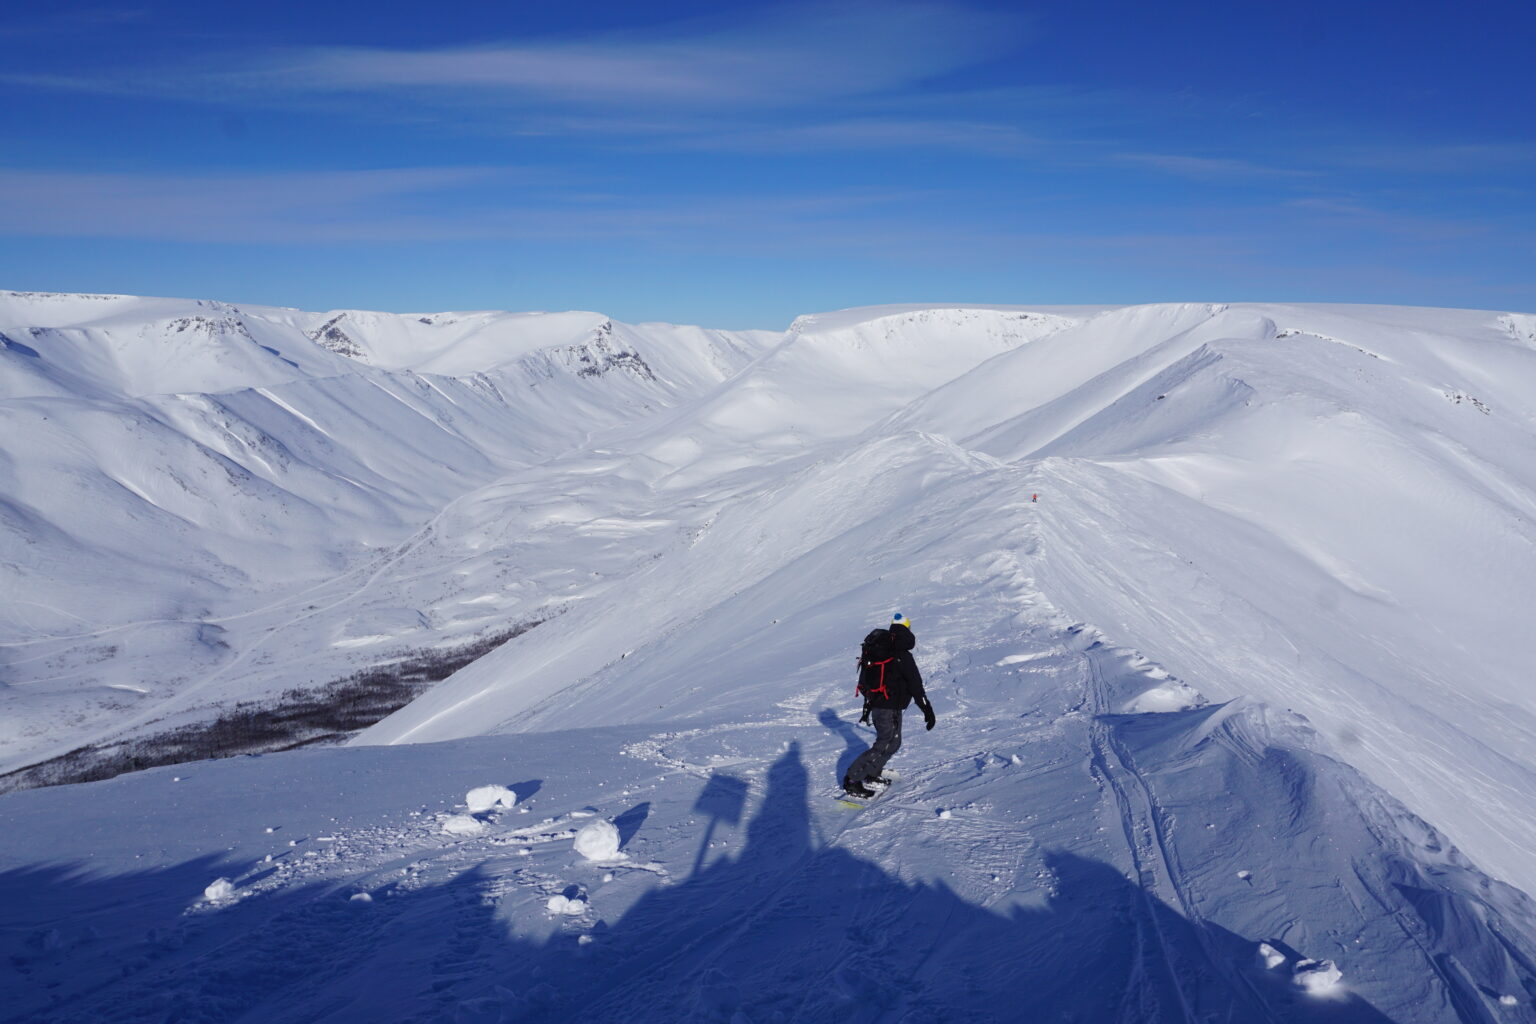 Snowboarding into the Kukisvumchorr Backcountry in the Khibiny Mountains of Russia